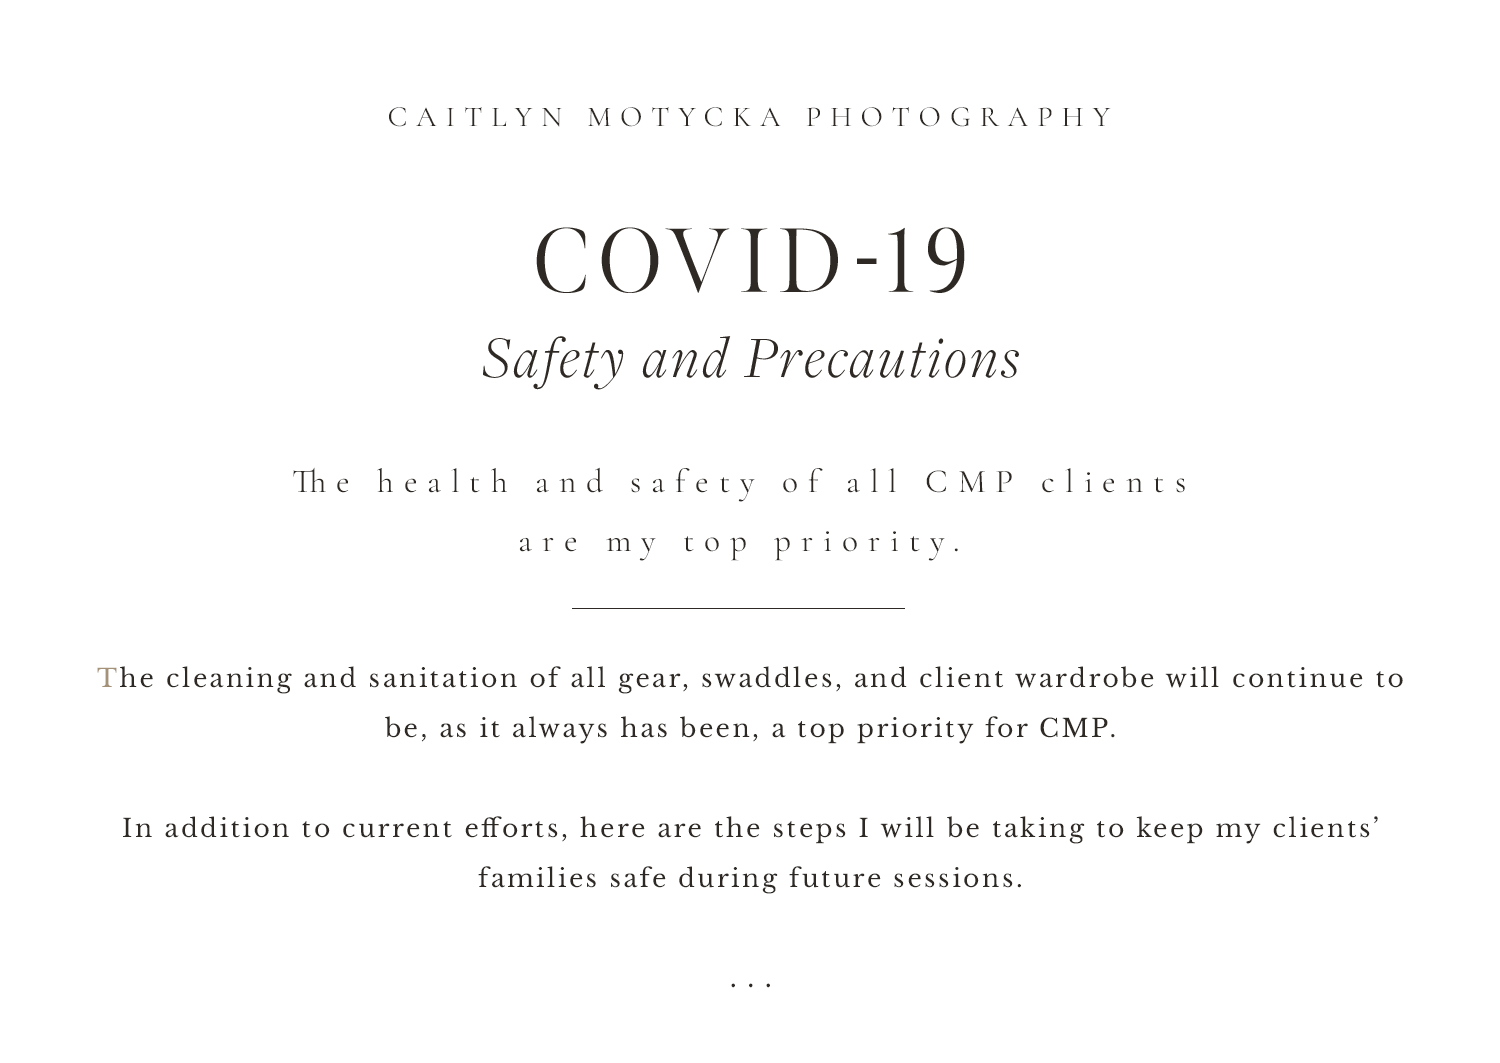 Covid Policies from Charleston Family and Newborn Photographer, Caitlyn Motycka Photography